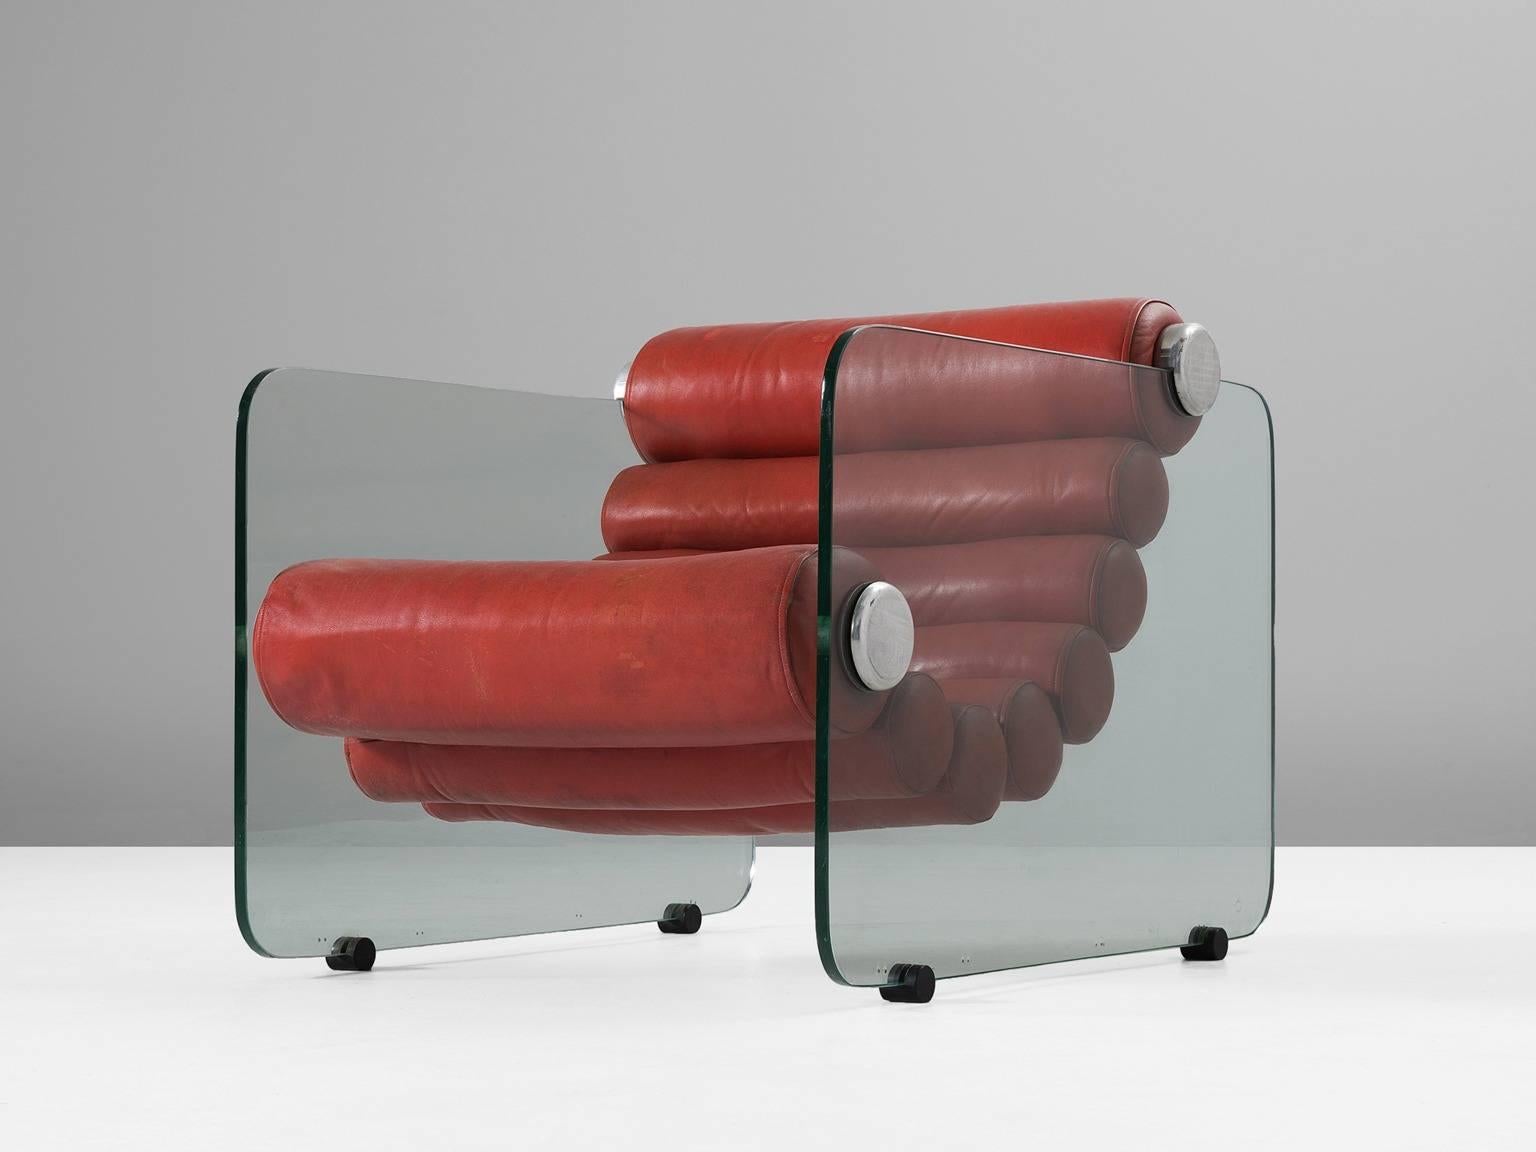 Lounge chair 'Hyaline', in glass, metal and red leather, by Fabio Lenci for Comfort Line, Italy 1967. 

Characteristic lounge chair by Italian designer Fabio Lenci. Lenci is known for his designs with leather seating flanked by glass panels. The